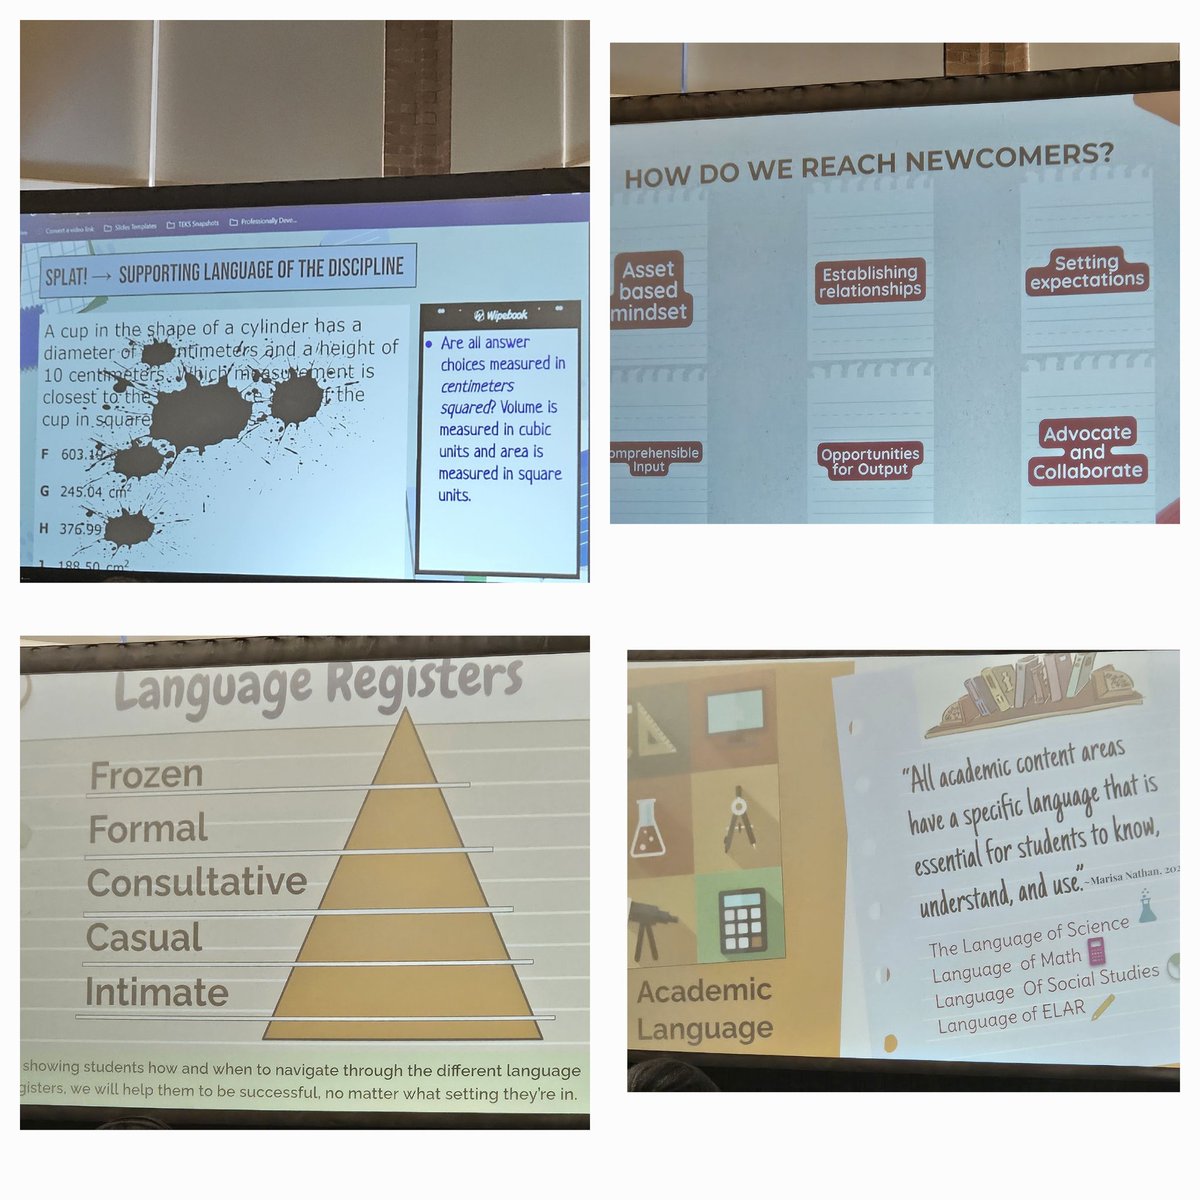 An amazing day of learning with amazing presenters all focused on supporting our EB's! Excited to share all this knowledge with Pearce Learning Community! @RISDMET #RISDMultilingual #RISDWeAreOne #RISDBelieves @Seidlitz_Ed